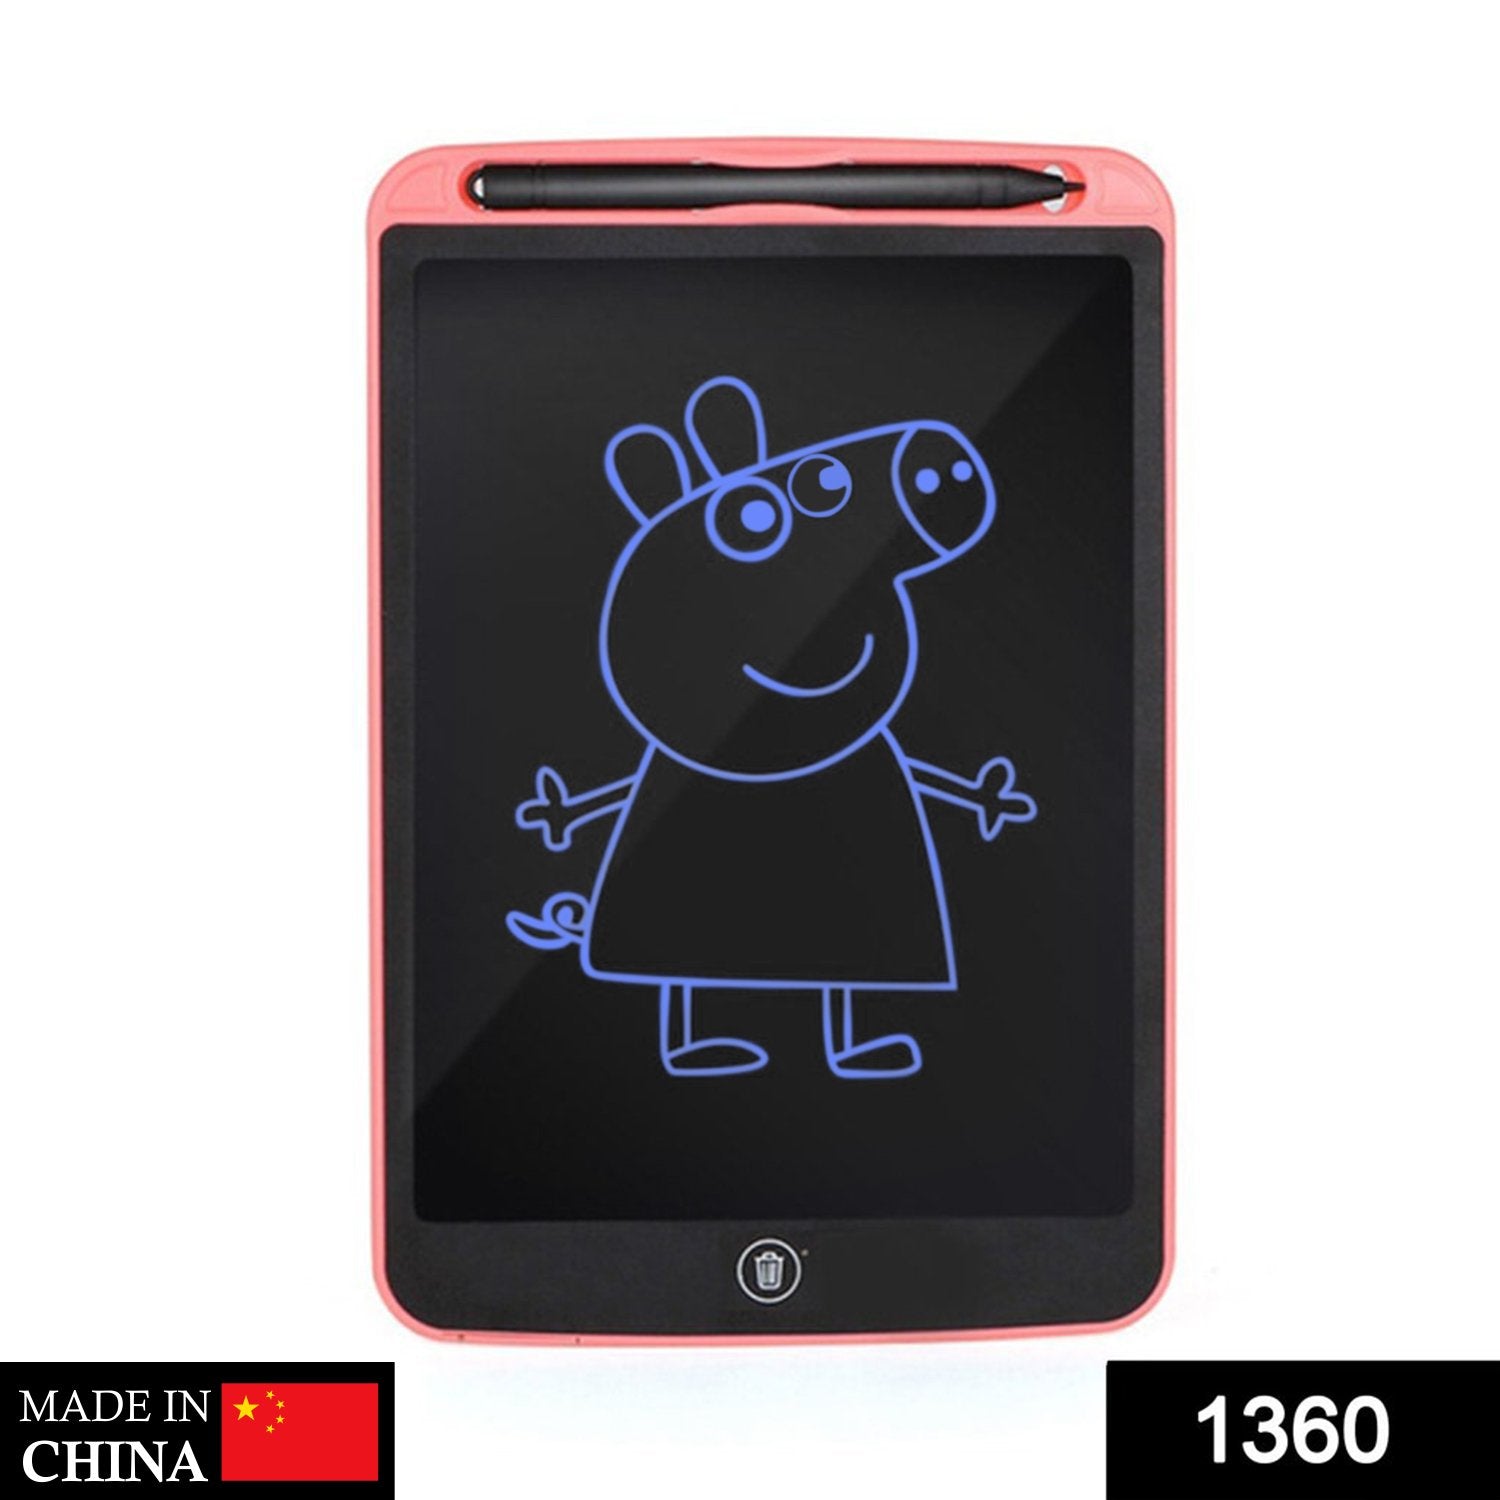 1360 LCD Portable Writing Pad/Tablet for Kids - 8.5 Inch Dukandaily